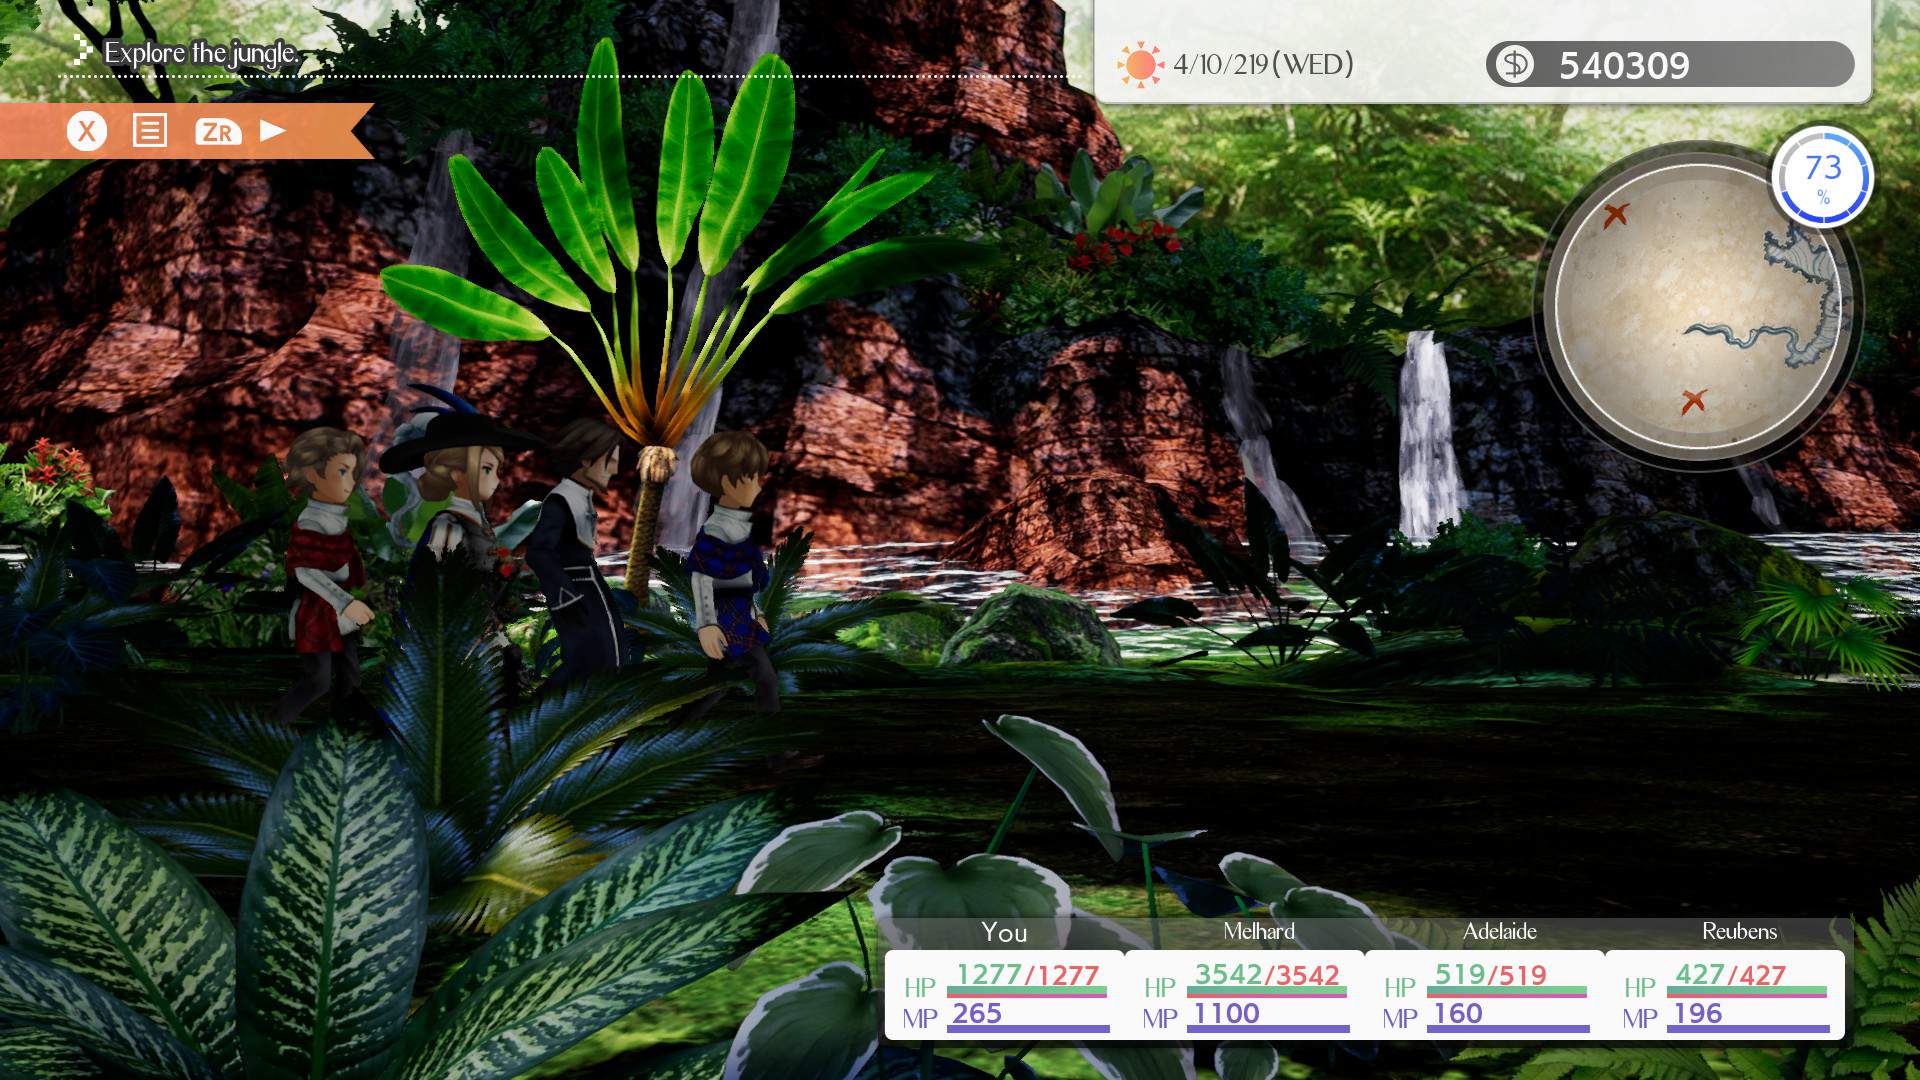 Gameplay screenshot of the party of 4 on an expedition, exploring a jungle